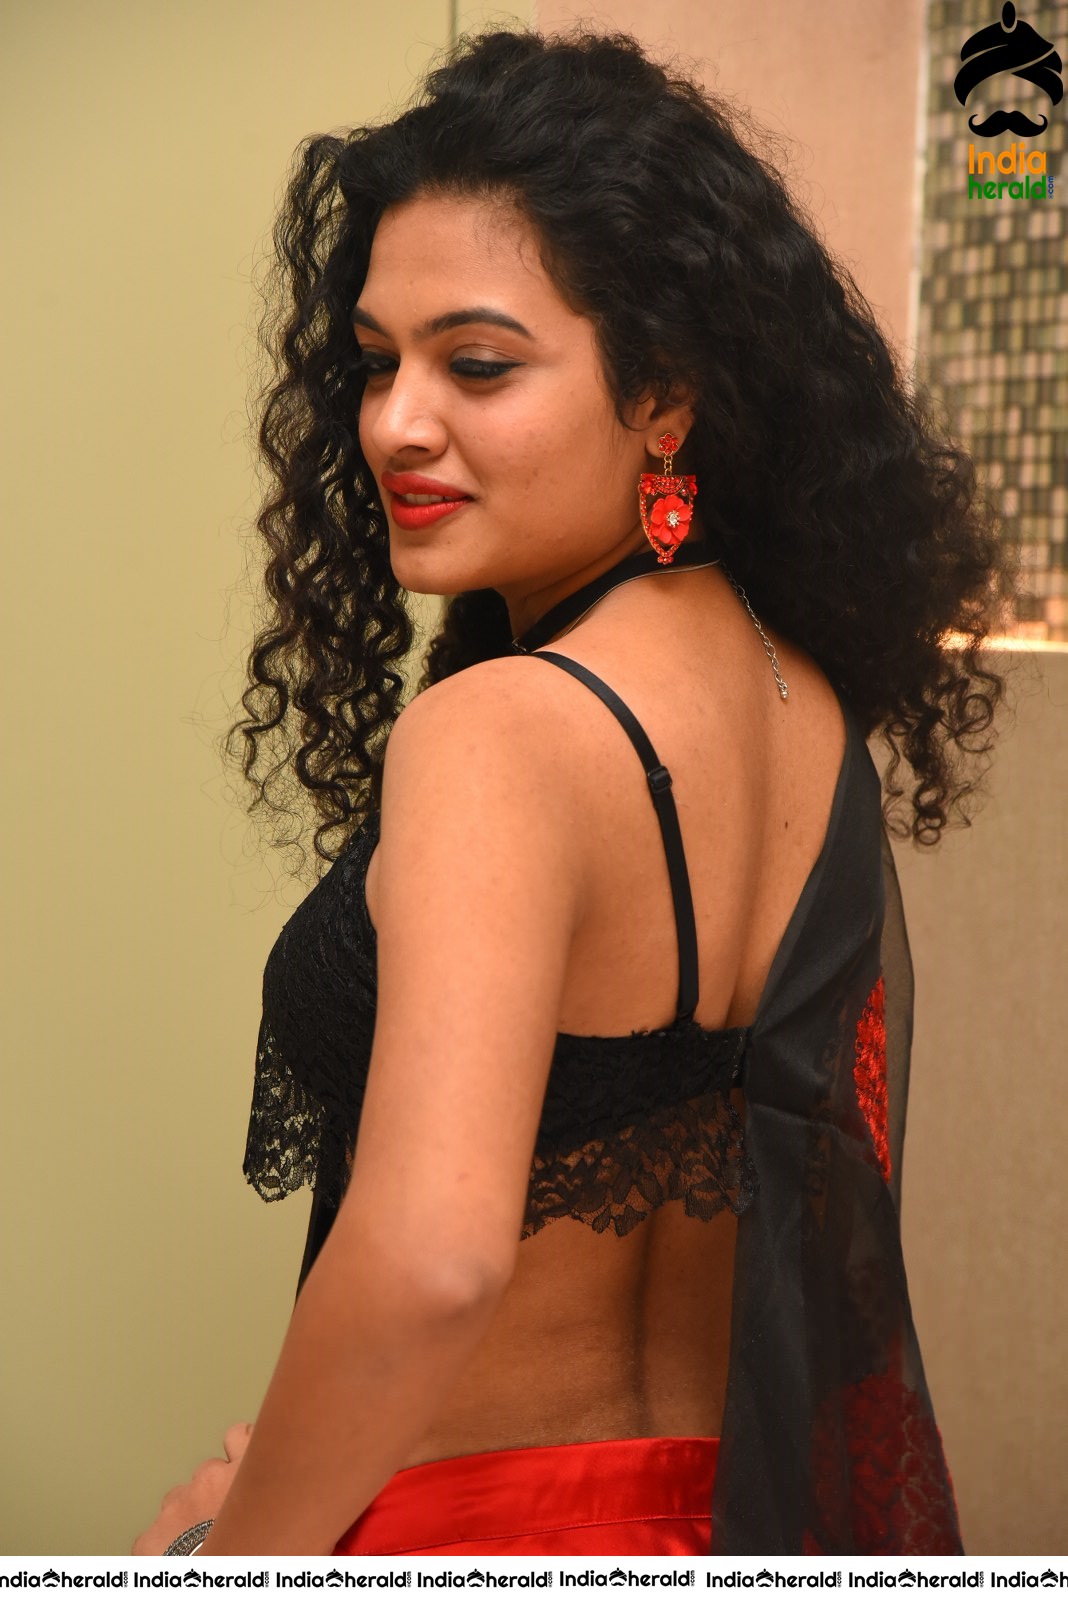 Sehnaaz Gill Porn Pic - Riya Sizzling Hot Waist and Navel Show in Black Brassiere a